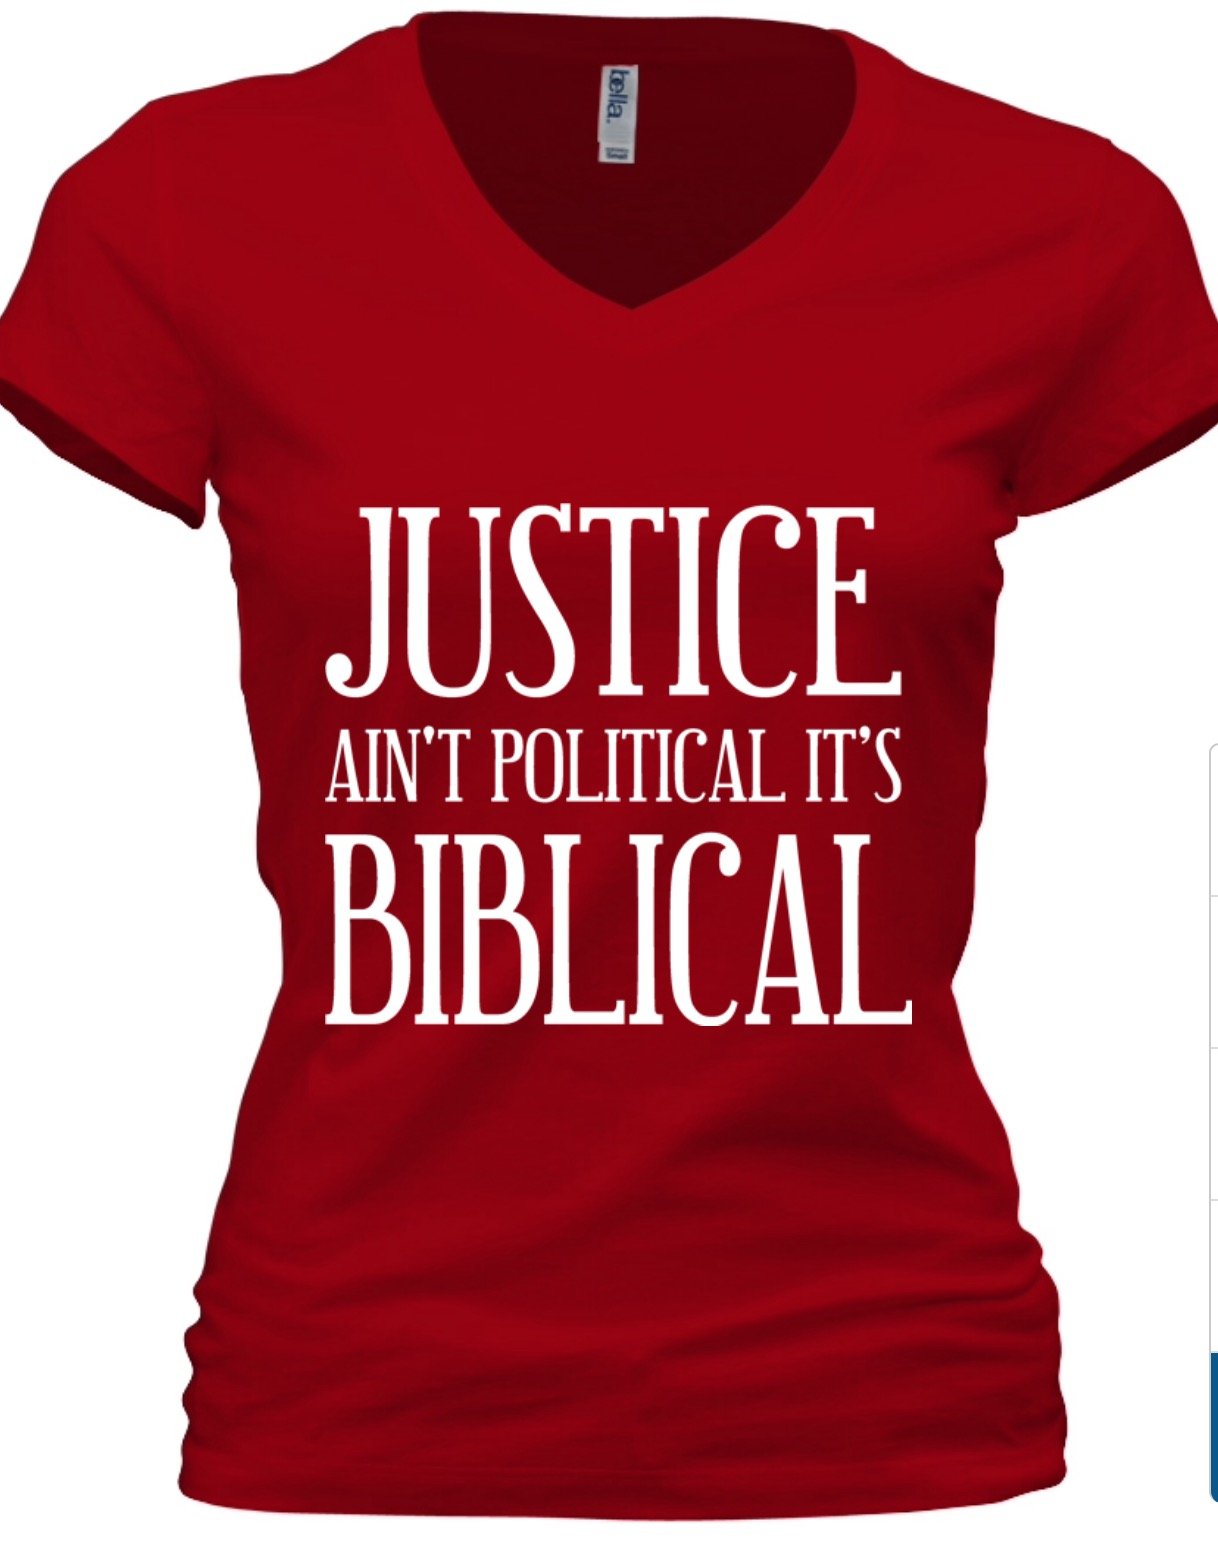 Image of JUSTICE AIN'T POLITICAL IT'S BIBLICAL WOMEN'S VNECK TSHIRT PLEASE ALLOW UP TO 14-16 BUSINESS DAYS TO